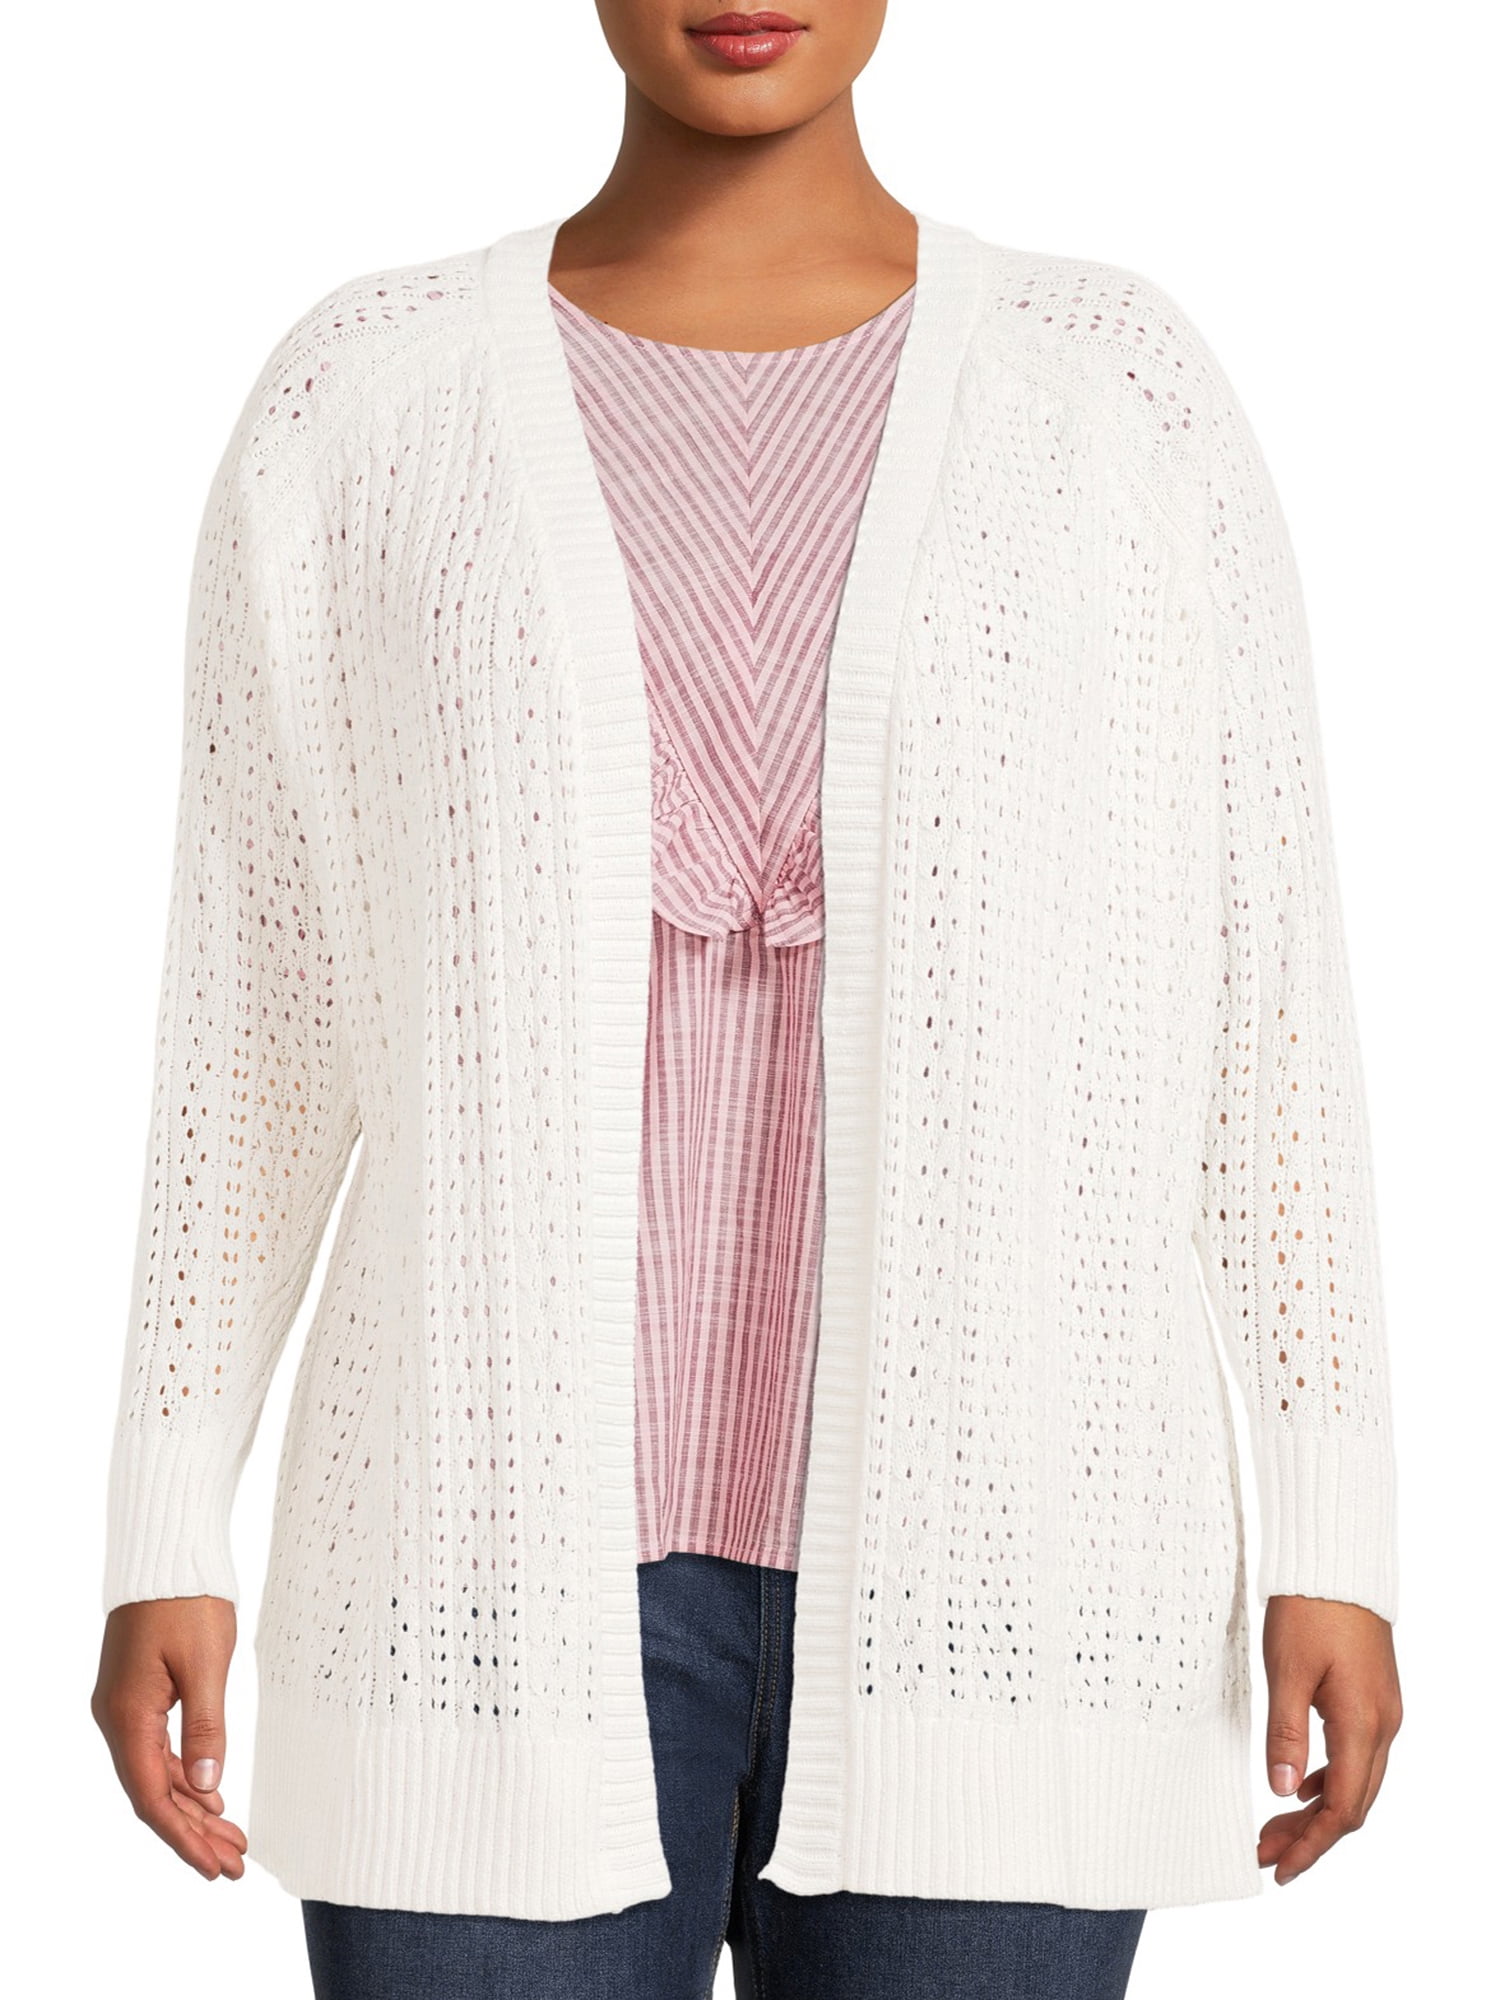 Roxy Juniors Shadow Diamonds Hooded Relaxed Fit Cardigan Sweater